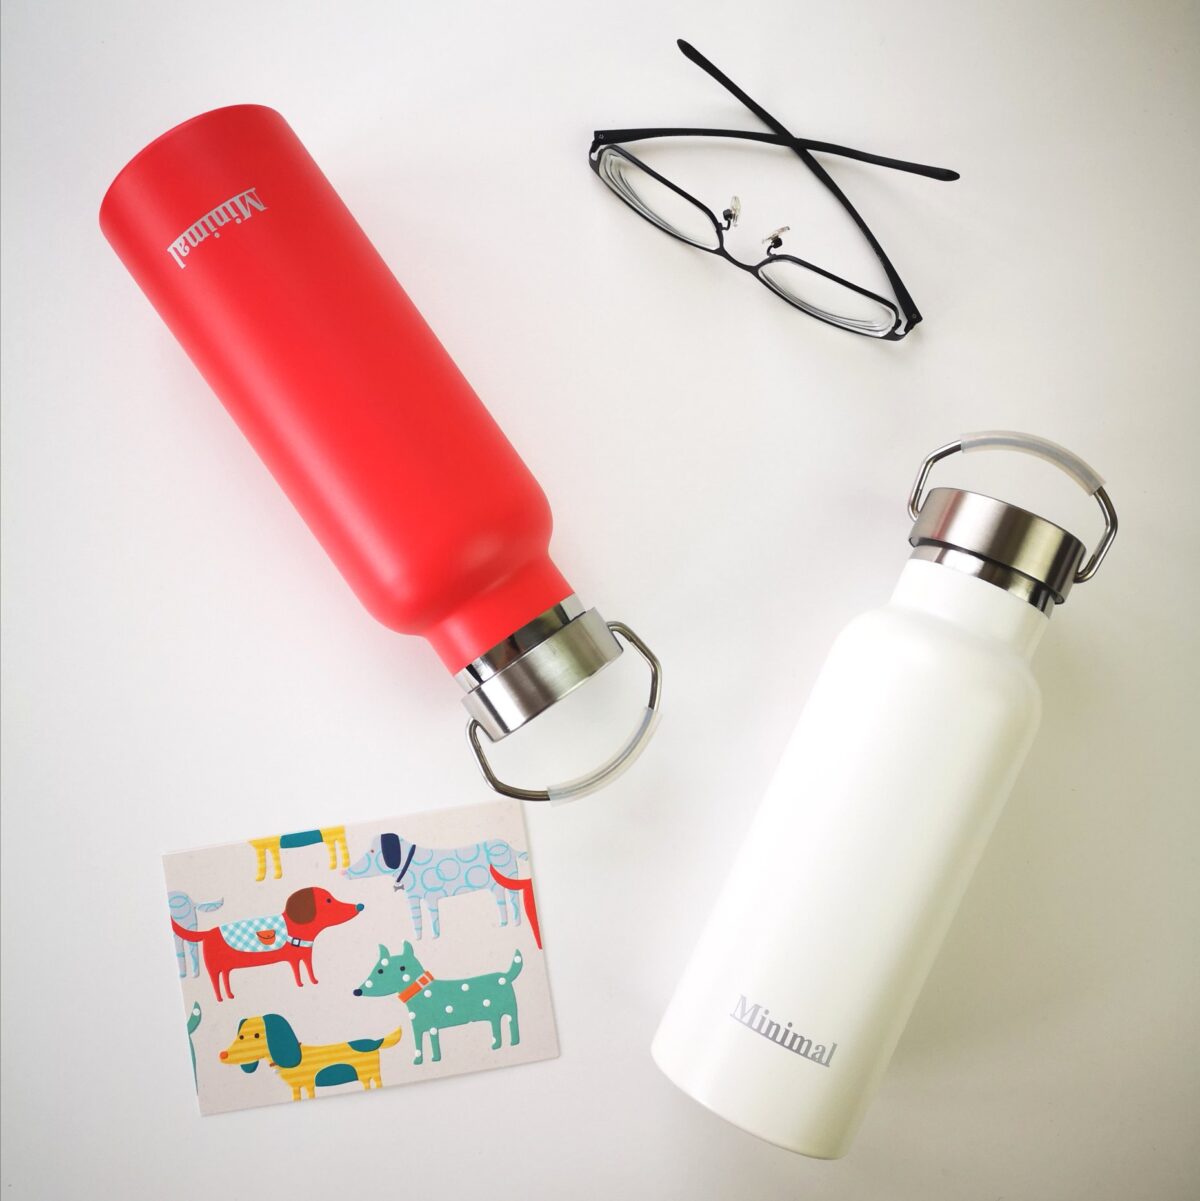 THERMAL TRAVEL BOTTLE 'ON THE GO' Guzzini, col. Transparent red